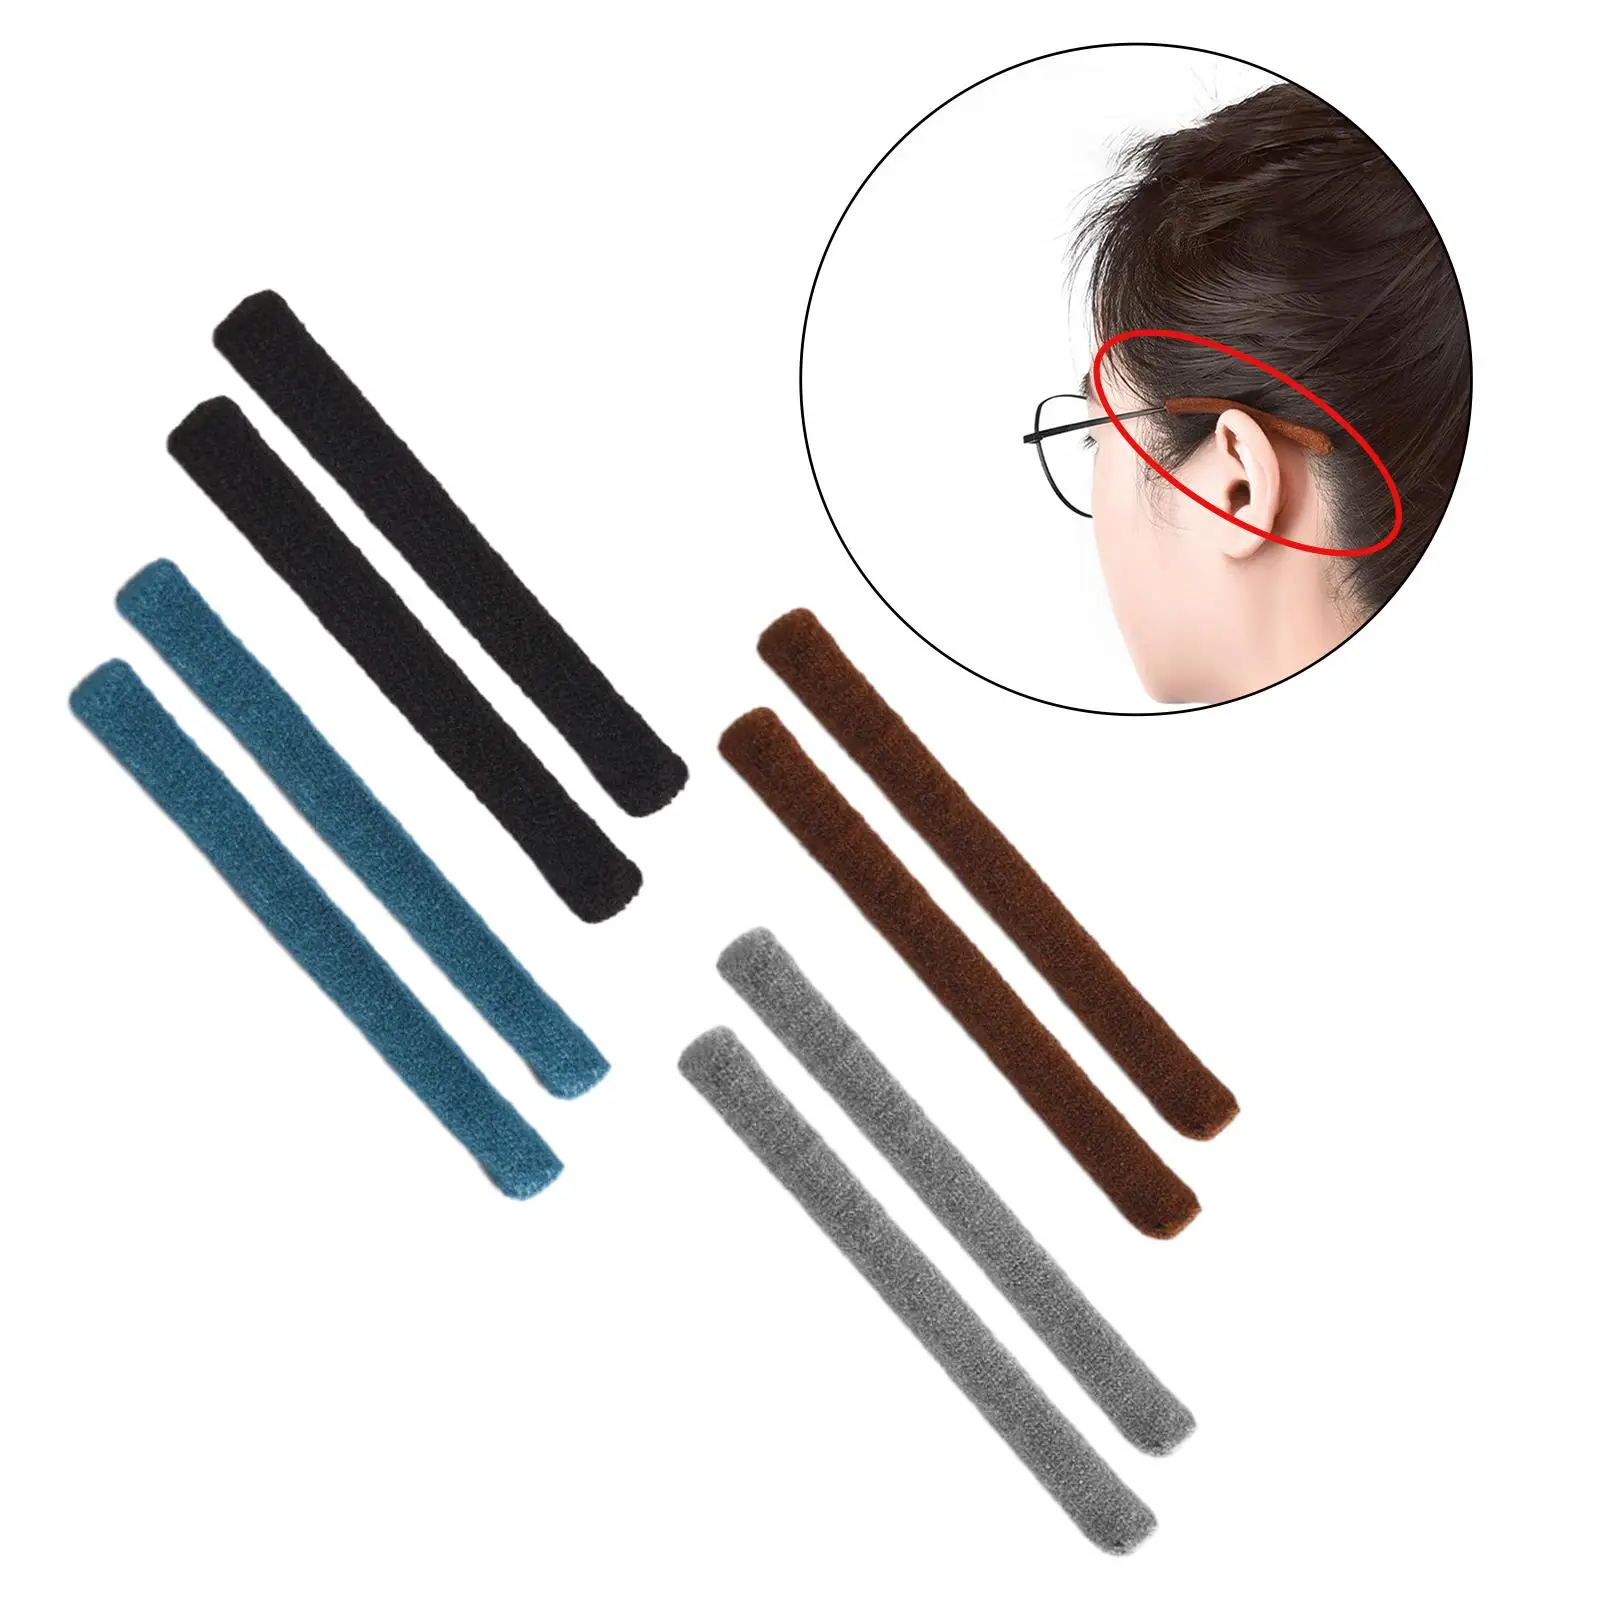 2 Pieces Eyeglasses Temple Tips Sleeve Anti Slip Ear Grip Hook Soft Glasses Ear Cushion for Reading Glasses Spectacle Sunglasses